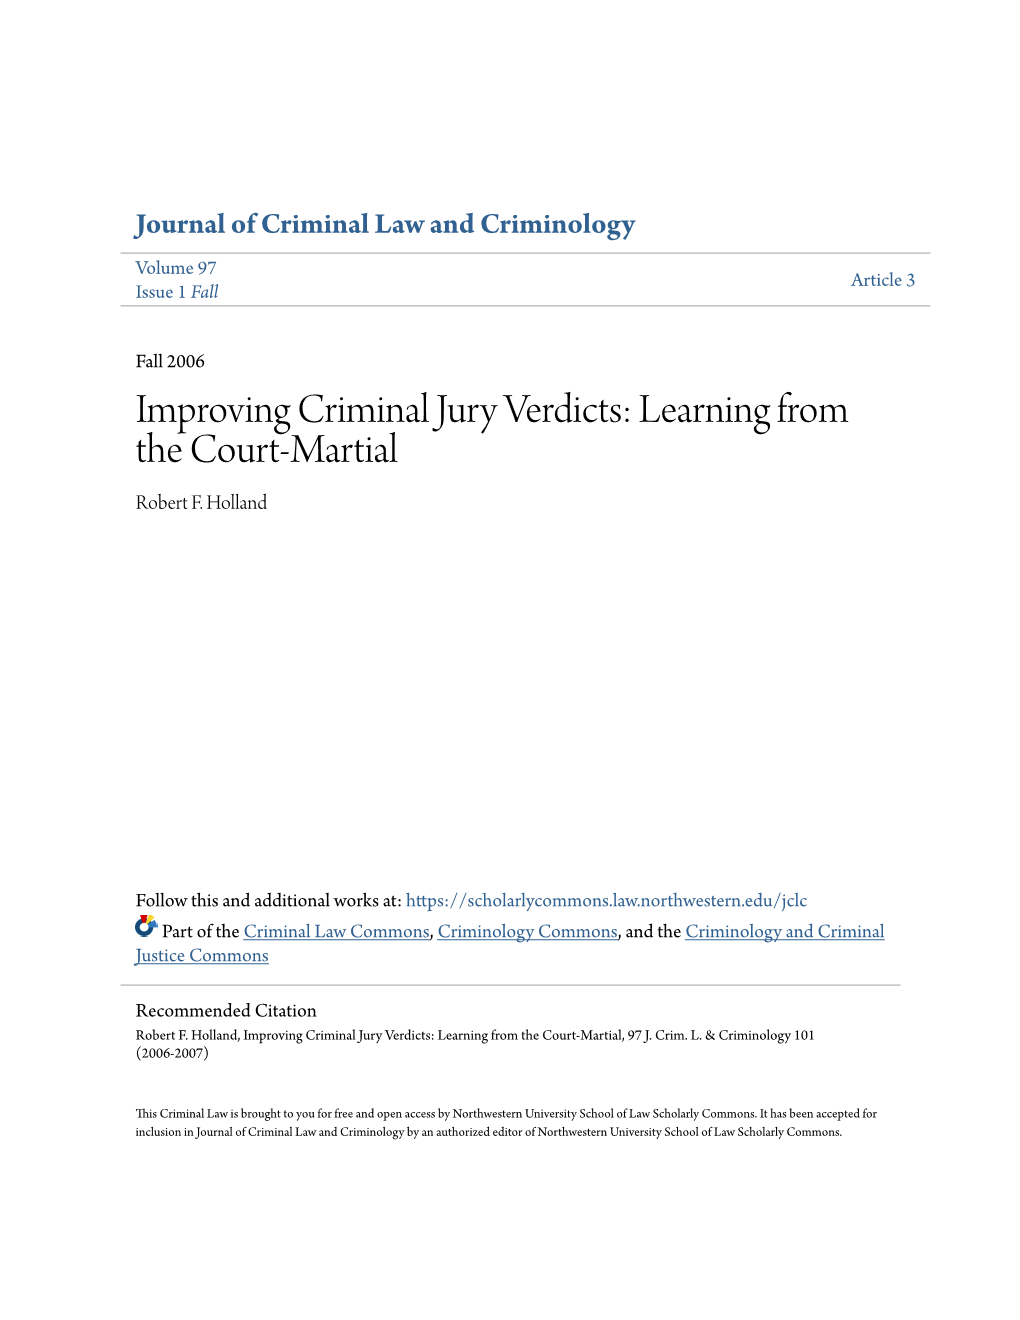 Improving Criminal Jury Verdicts: Learning from the Court-Martial Robert F